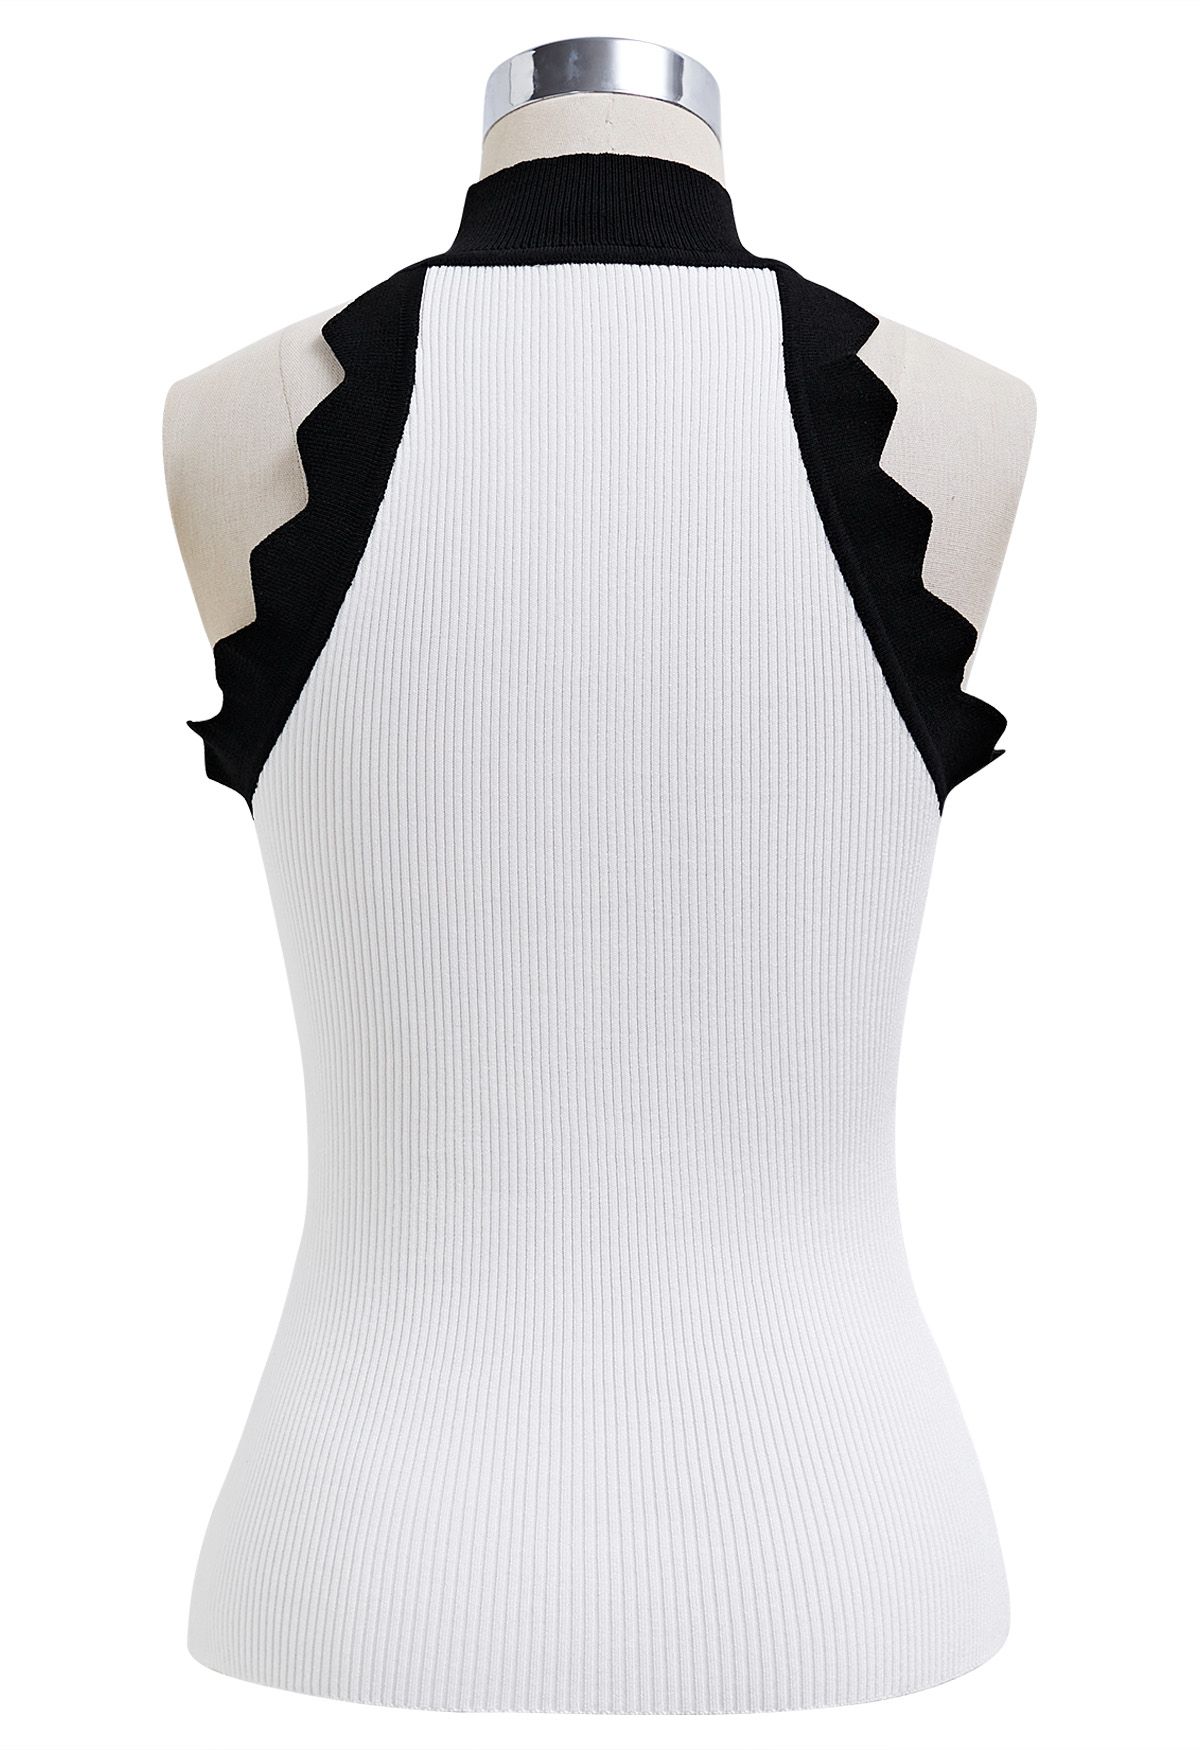 Wavy Contrast Edge Halter Neck Knit Top in White